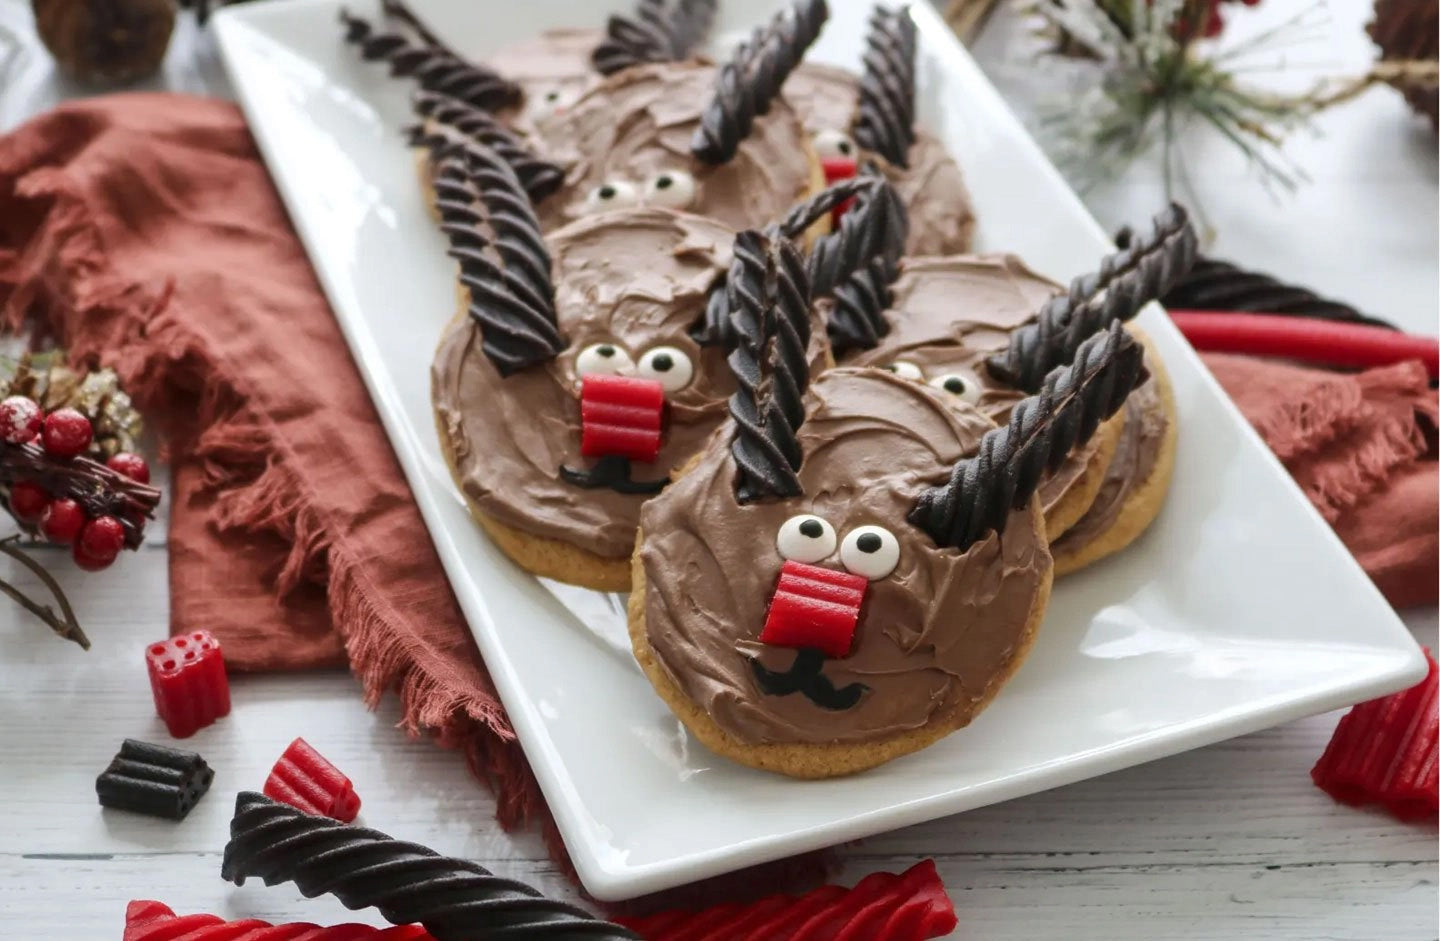 Reindeer Cookie Recipe made from Red Vines Original Red and Black Licorice